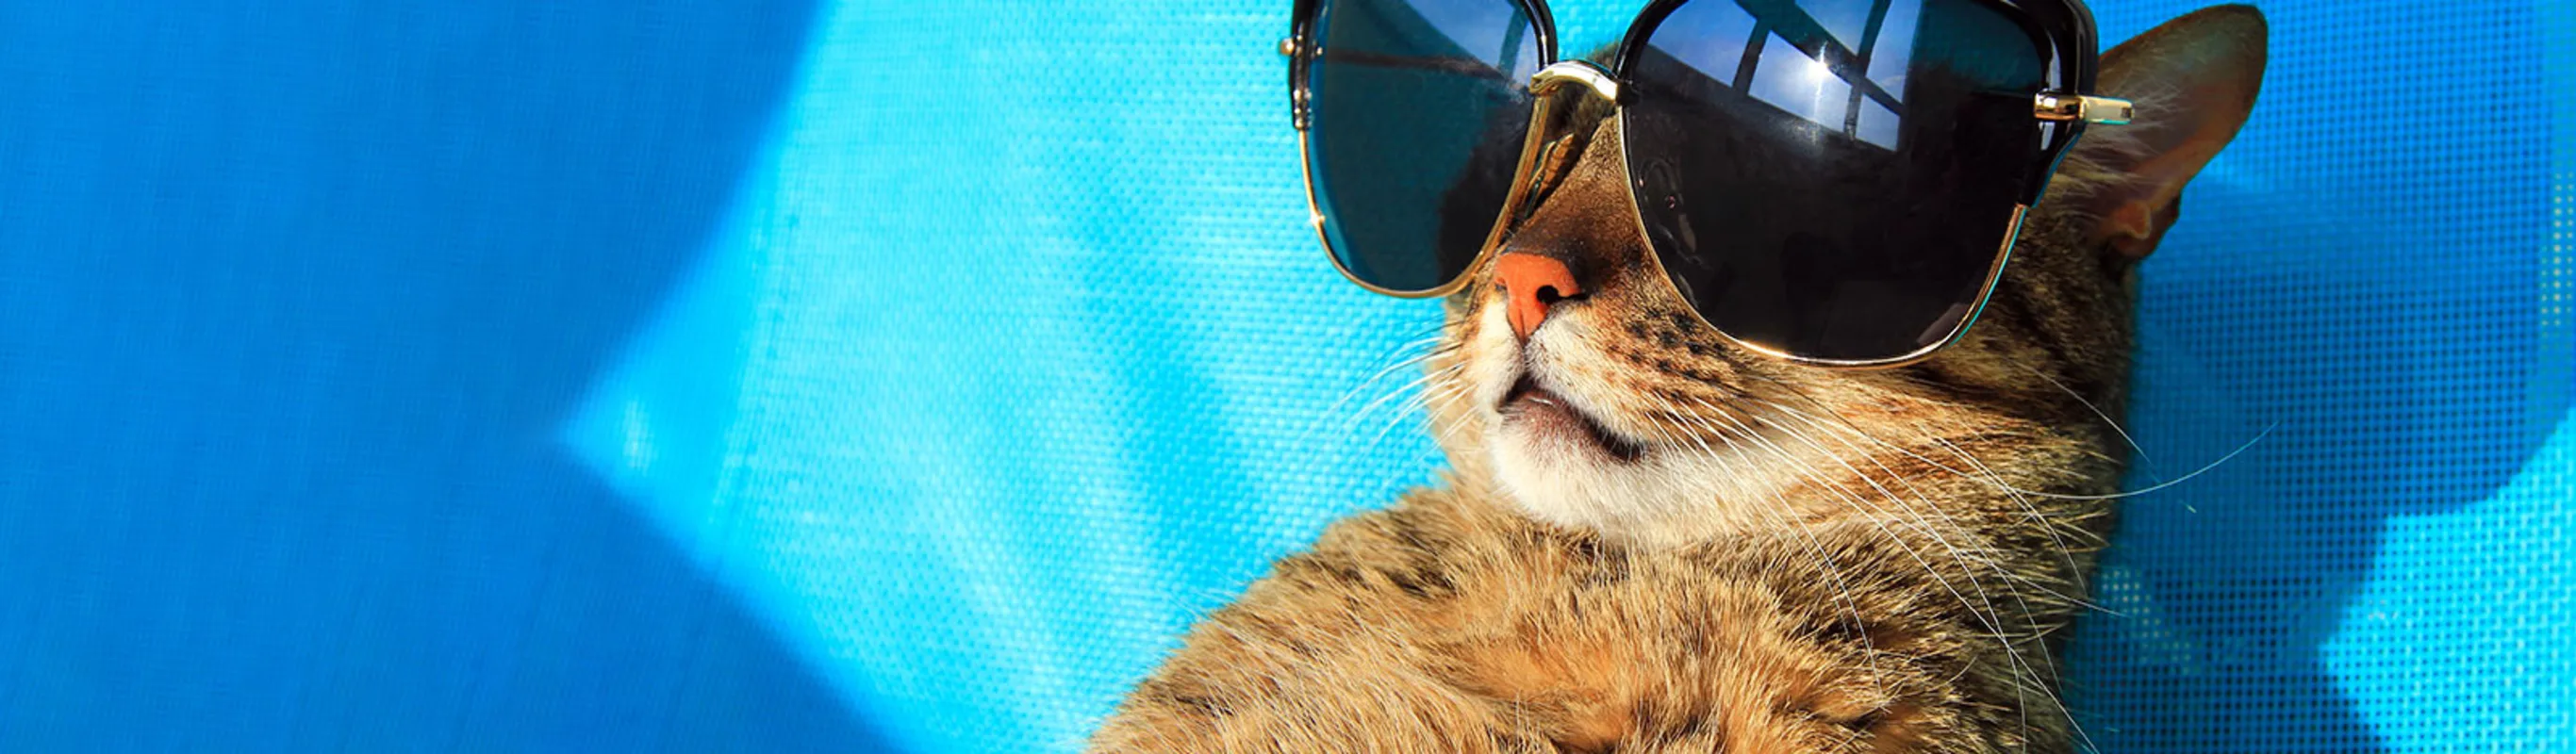 Cat with sunglasses laying on a blue chair